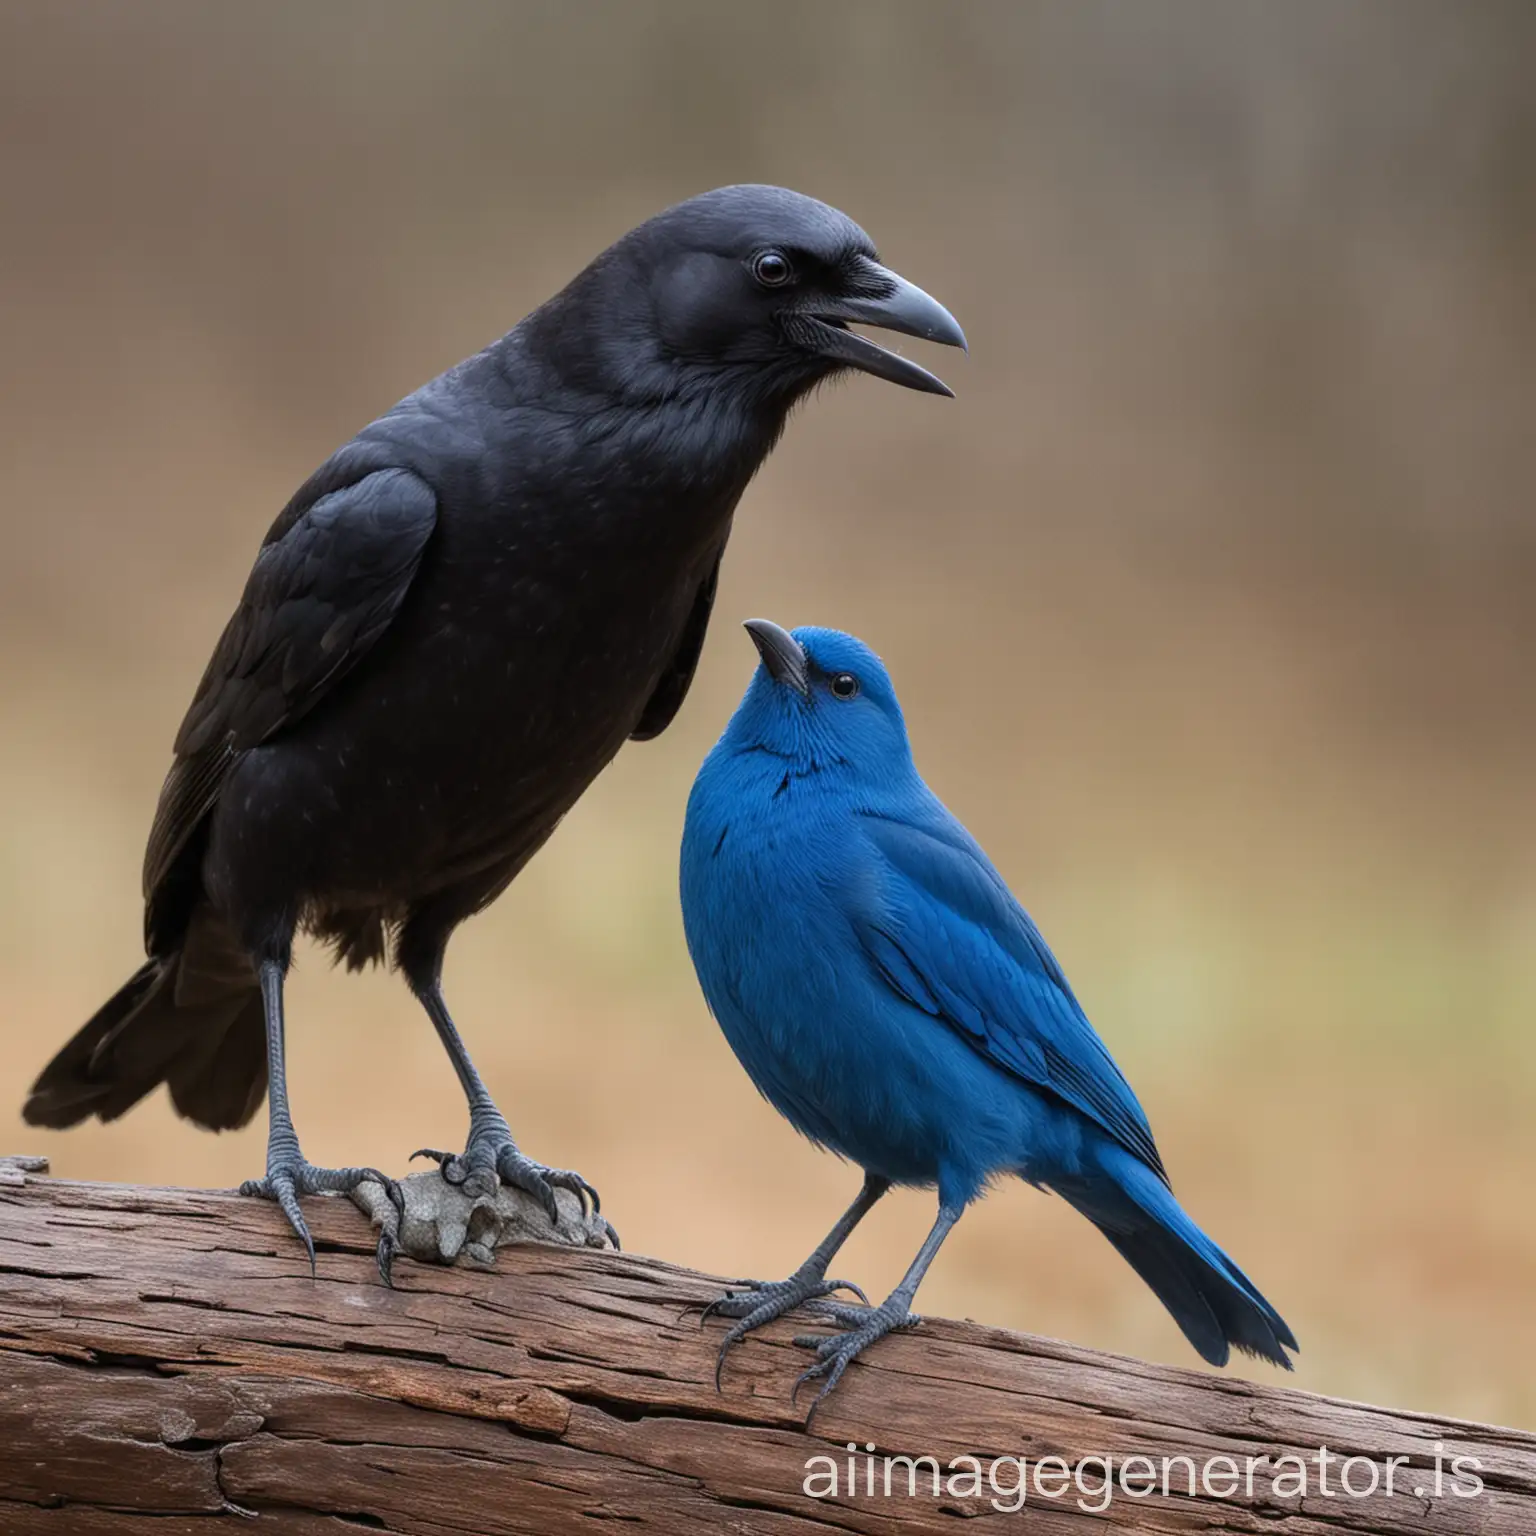 Friendly-Crow-and-Blue-Bird-Cute-and-Goofy-Friends